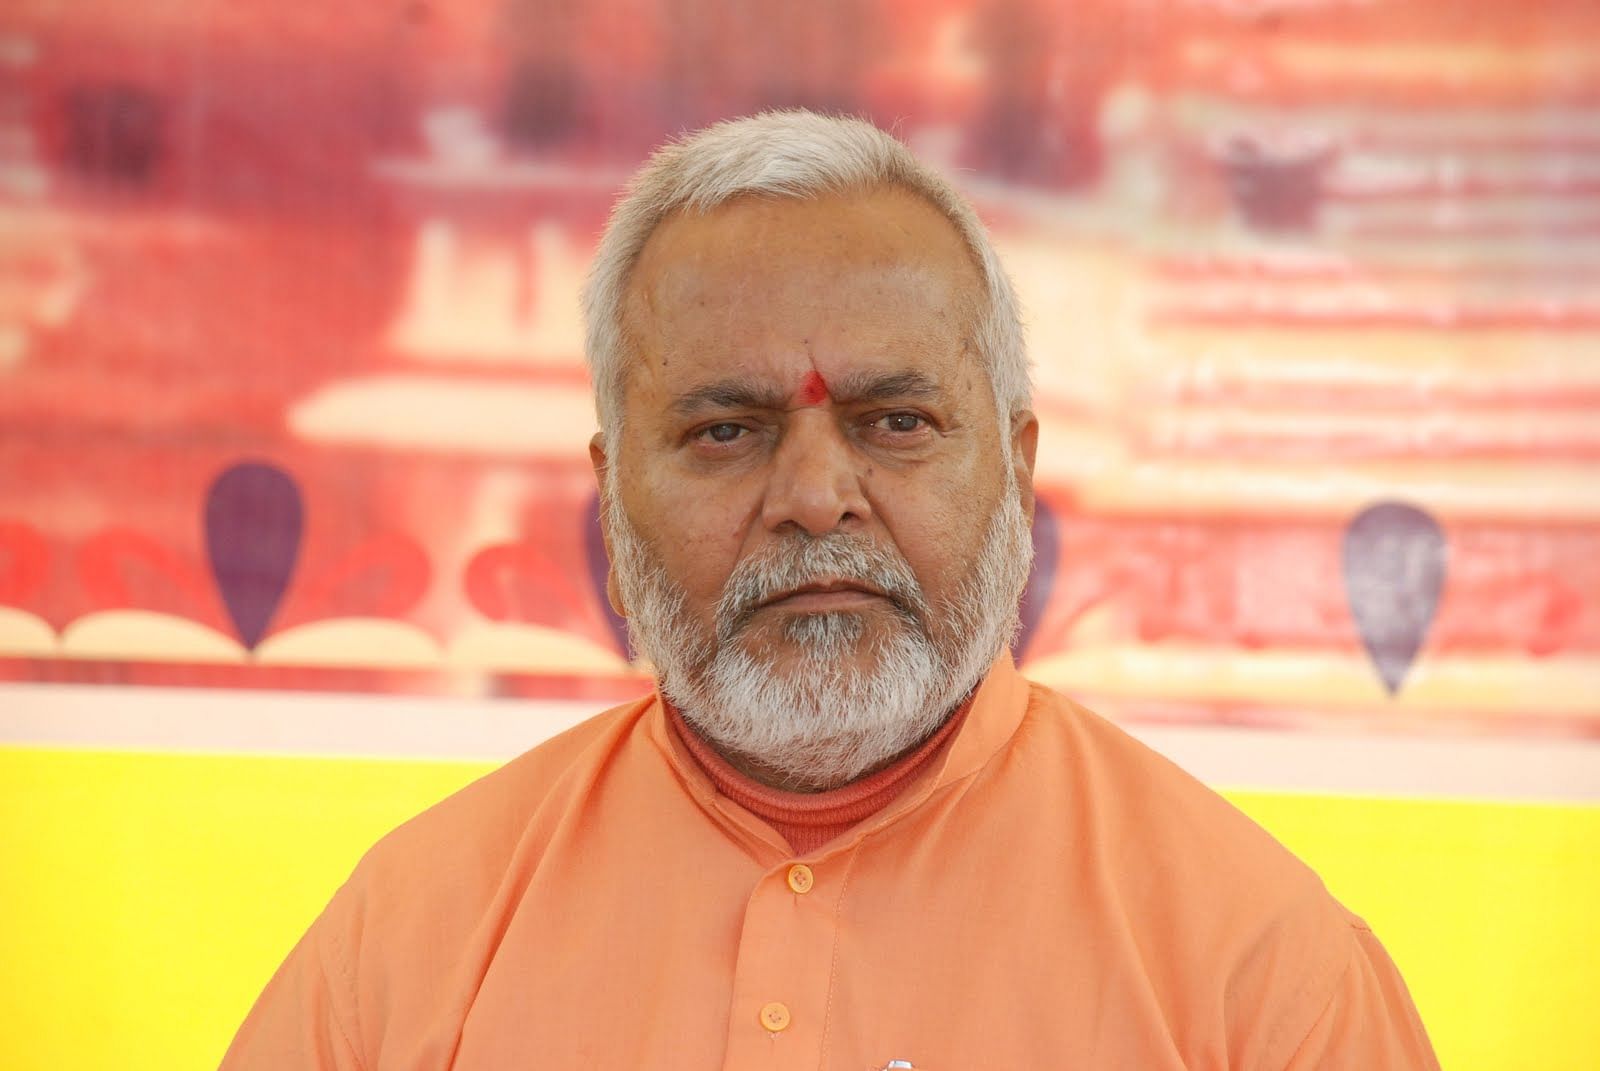 Swami Chinmayanand. (DH Photo)